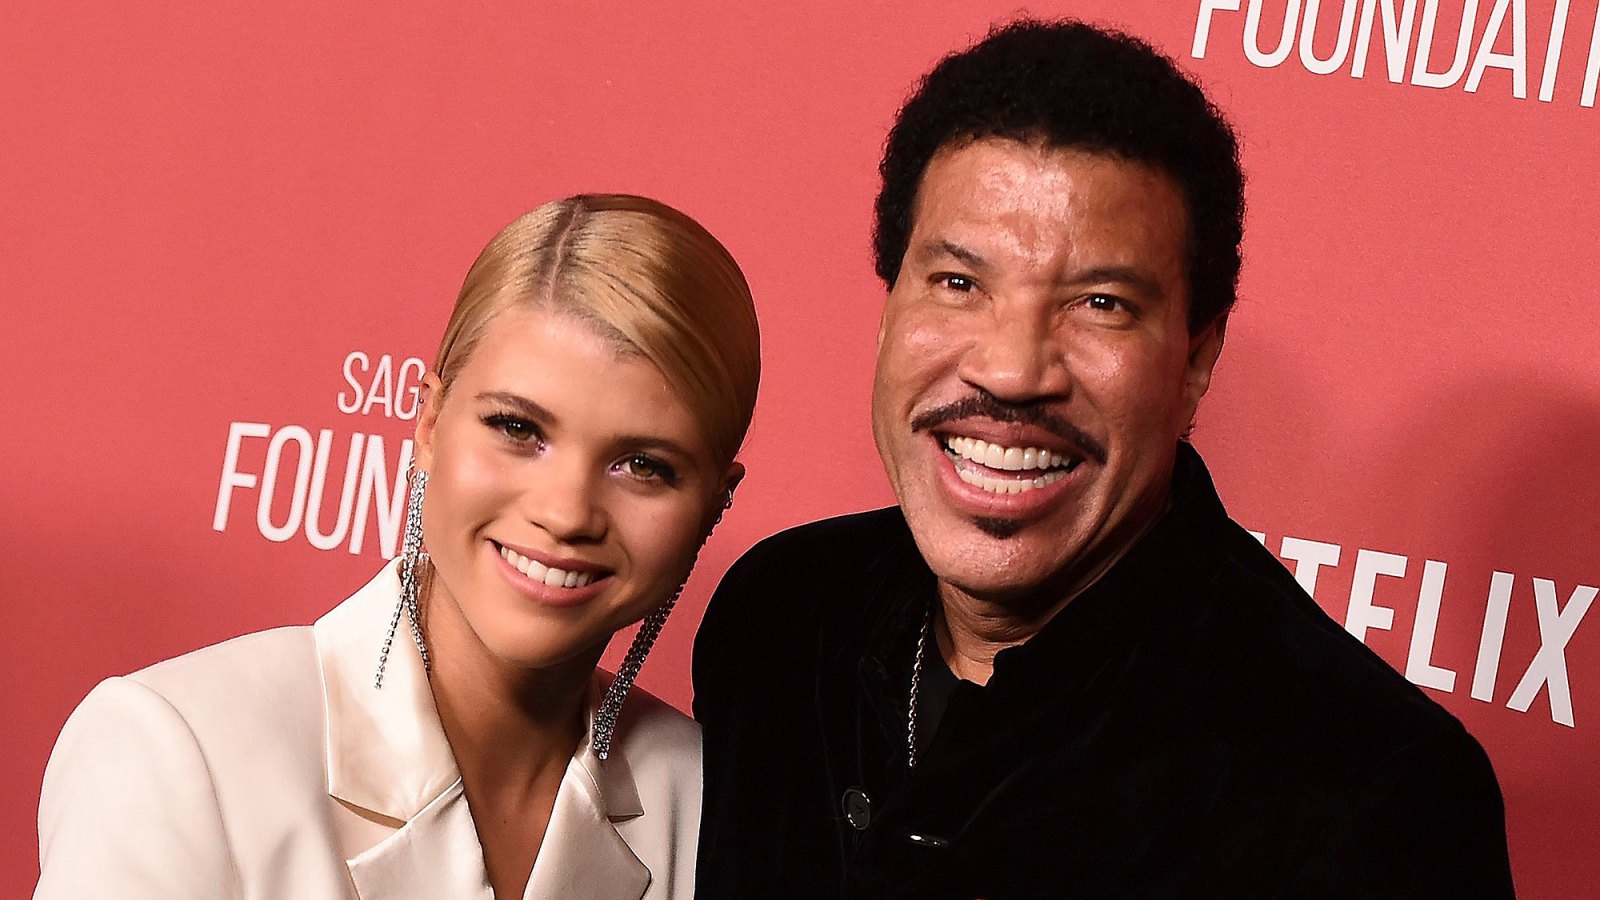 Lionel Richie Bakes a Pink Cake for Daughter Sofia's 22nd Birthday 1